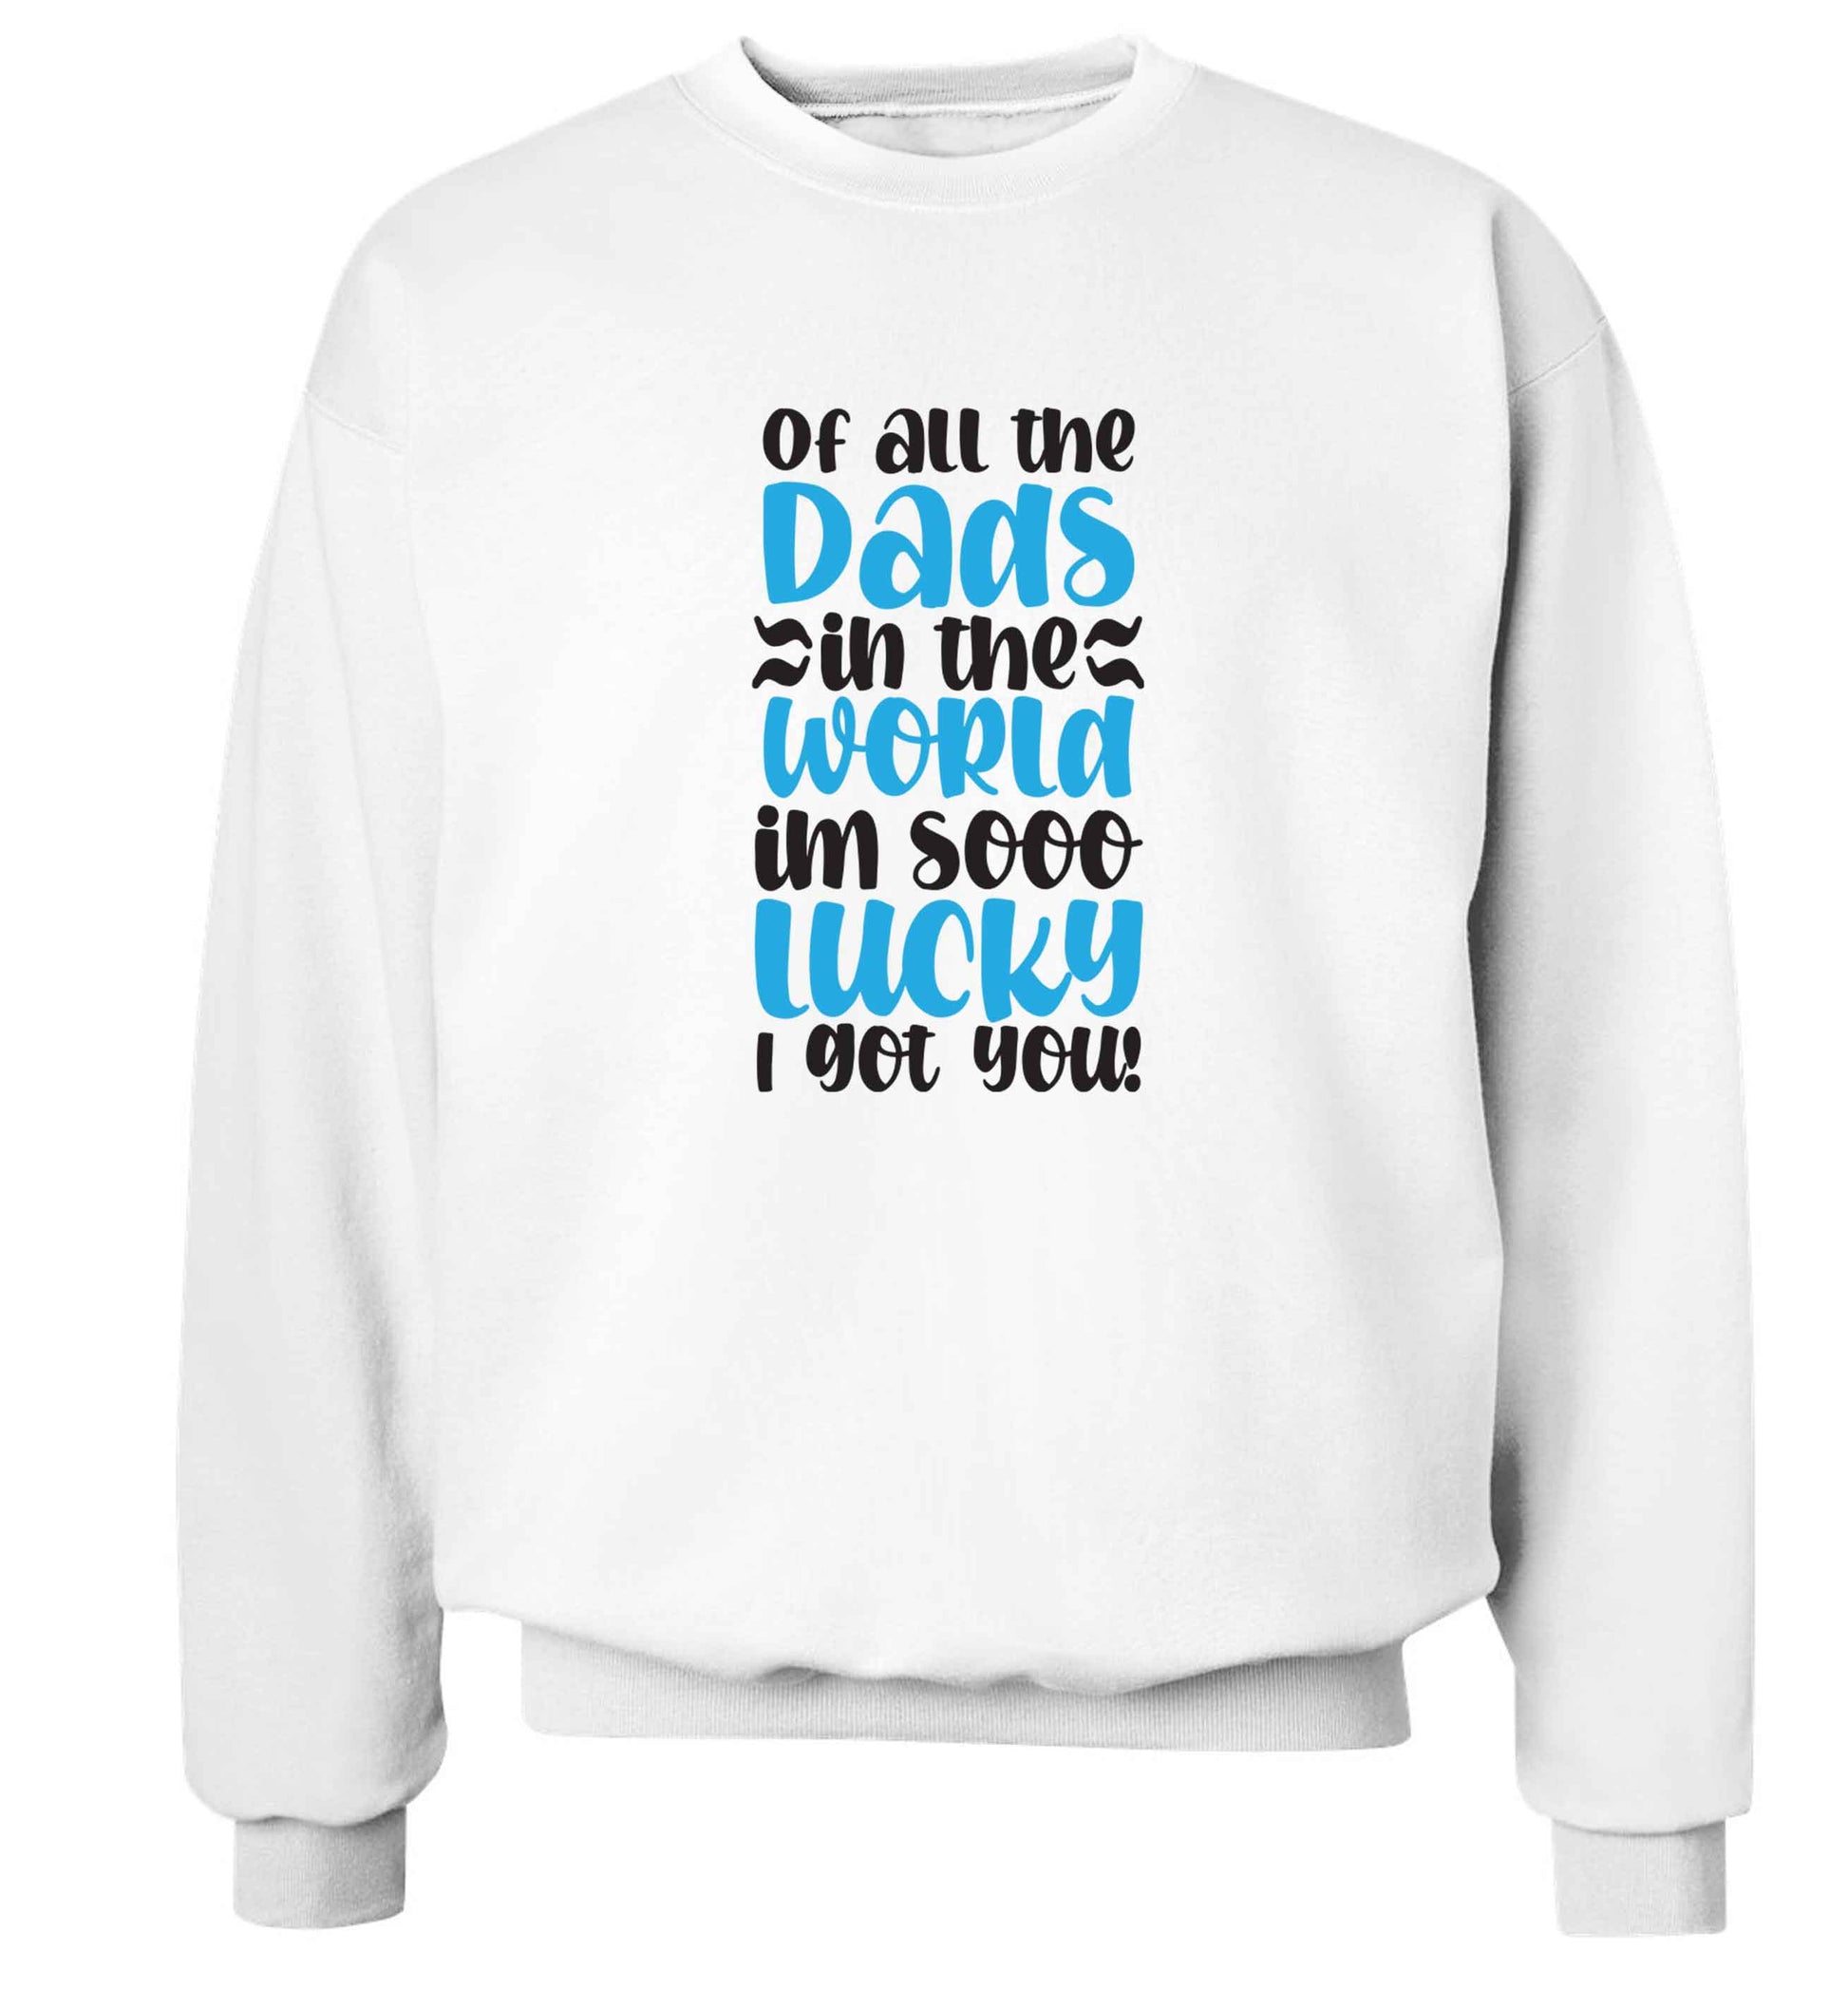 Of all the Dads in the world I'm so lucky I got you adult's unisex white sweater 2XL